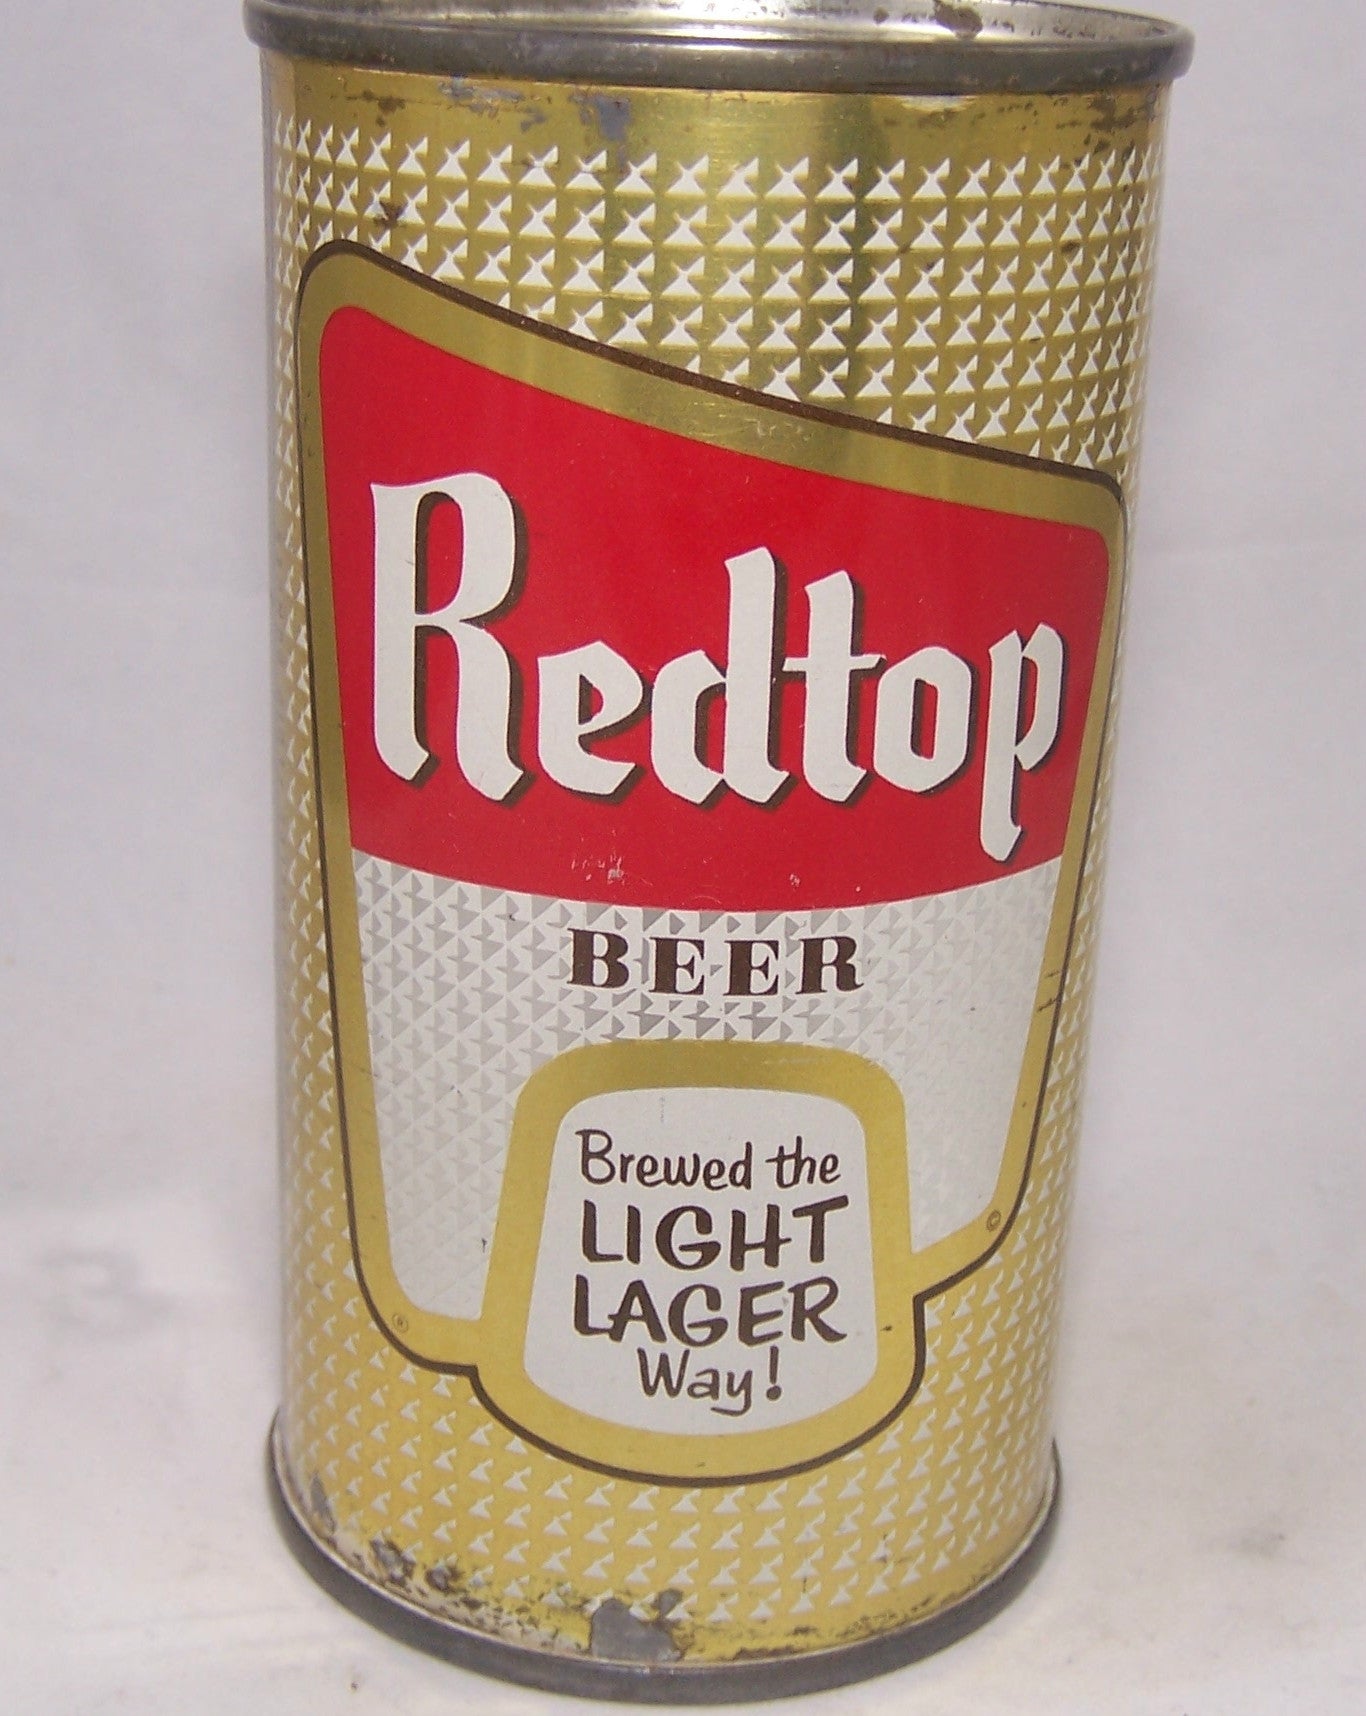 Redtop Beer (Brewed the Light Lager way) USBC 120-22, Grade 1 Sold on 09/19/16